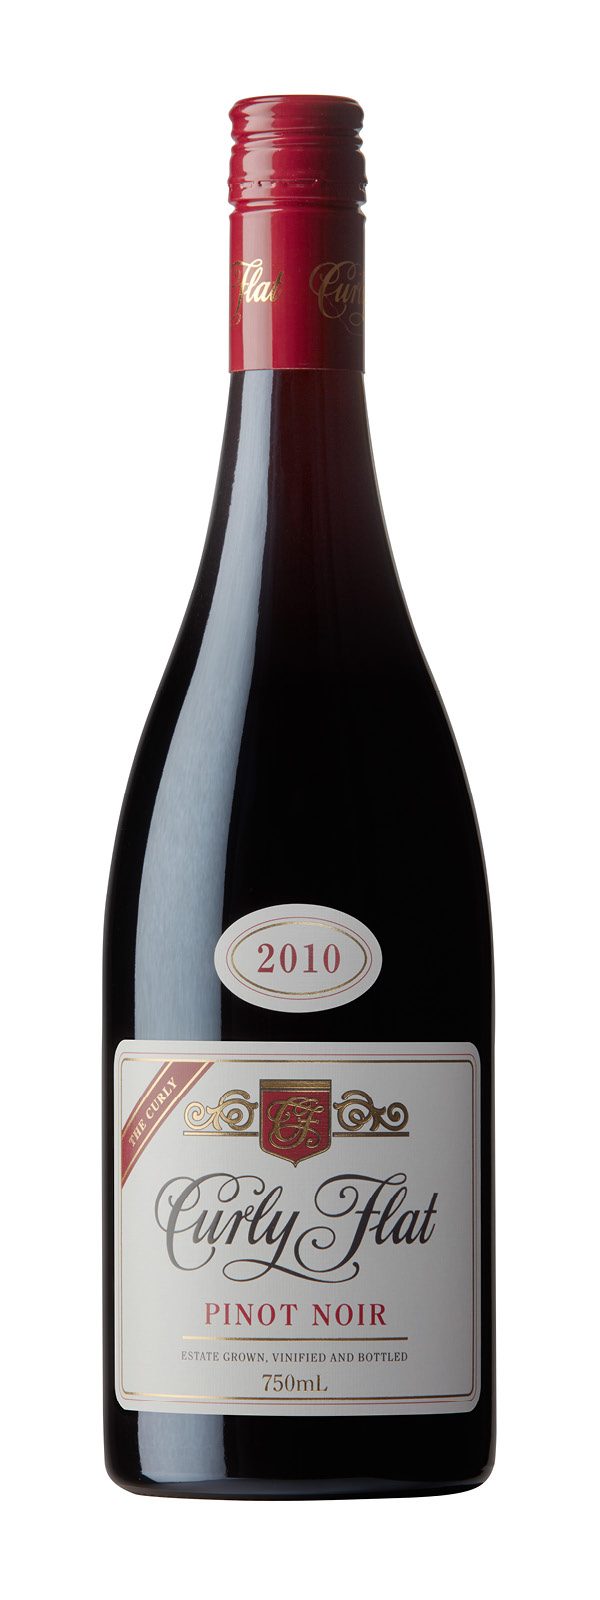 2010 The Curly Pinot Noir